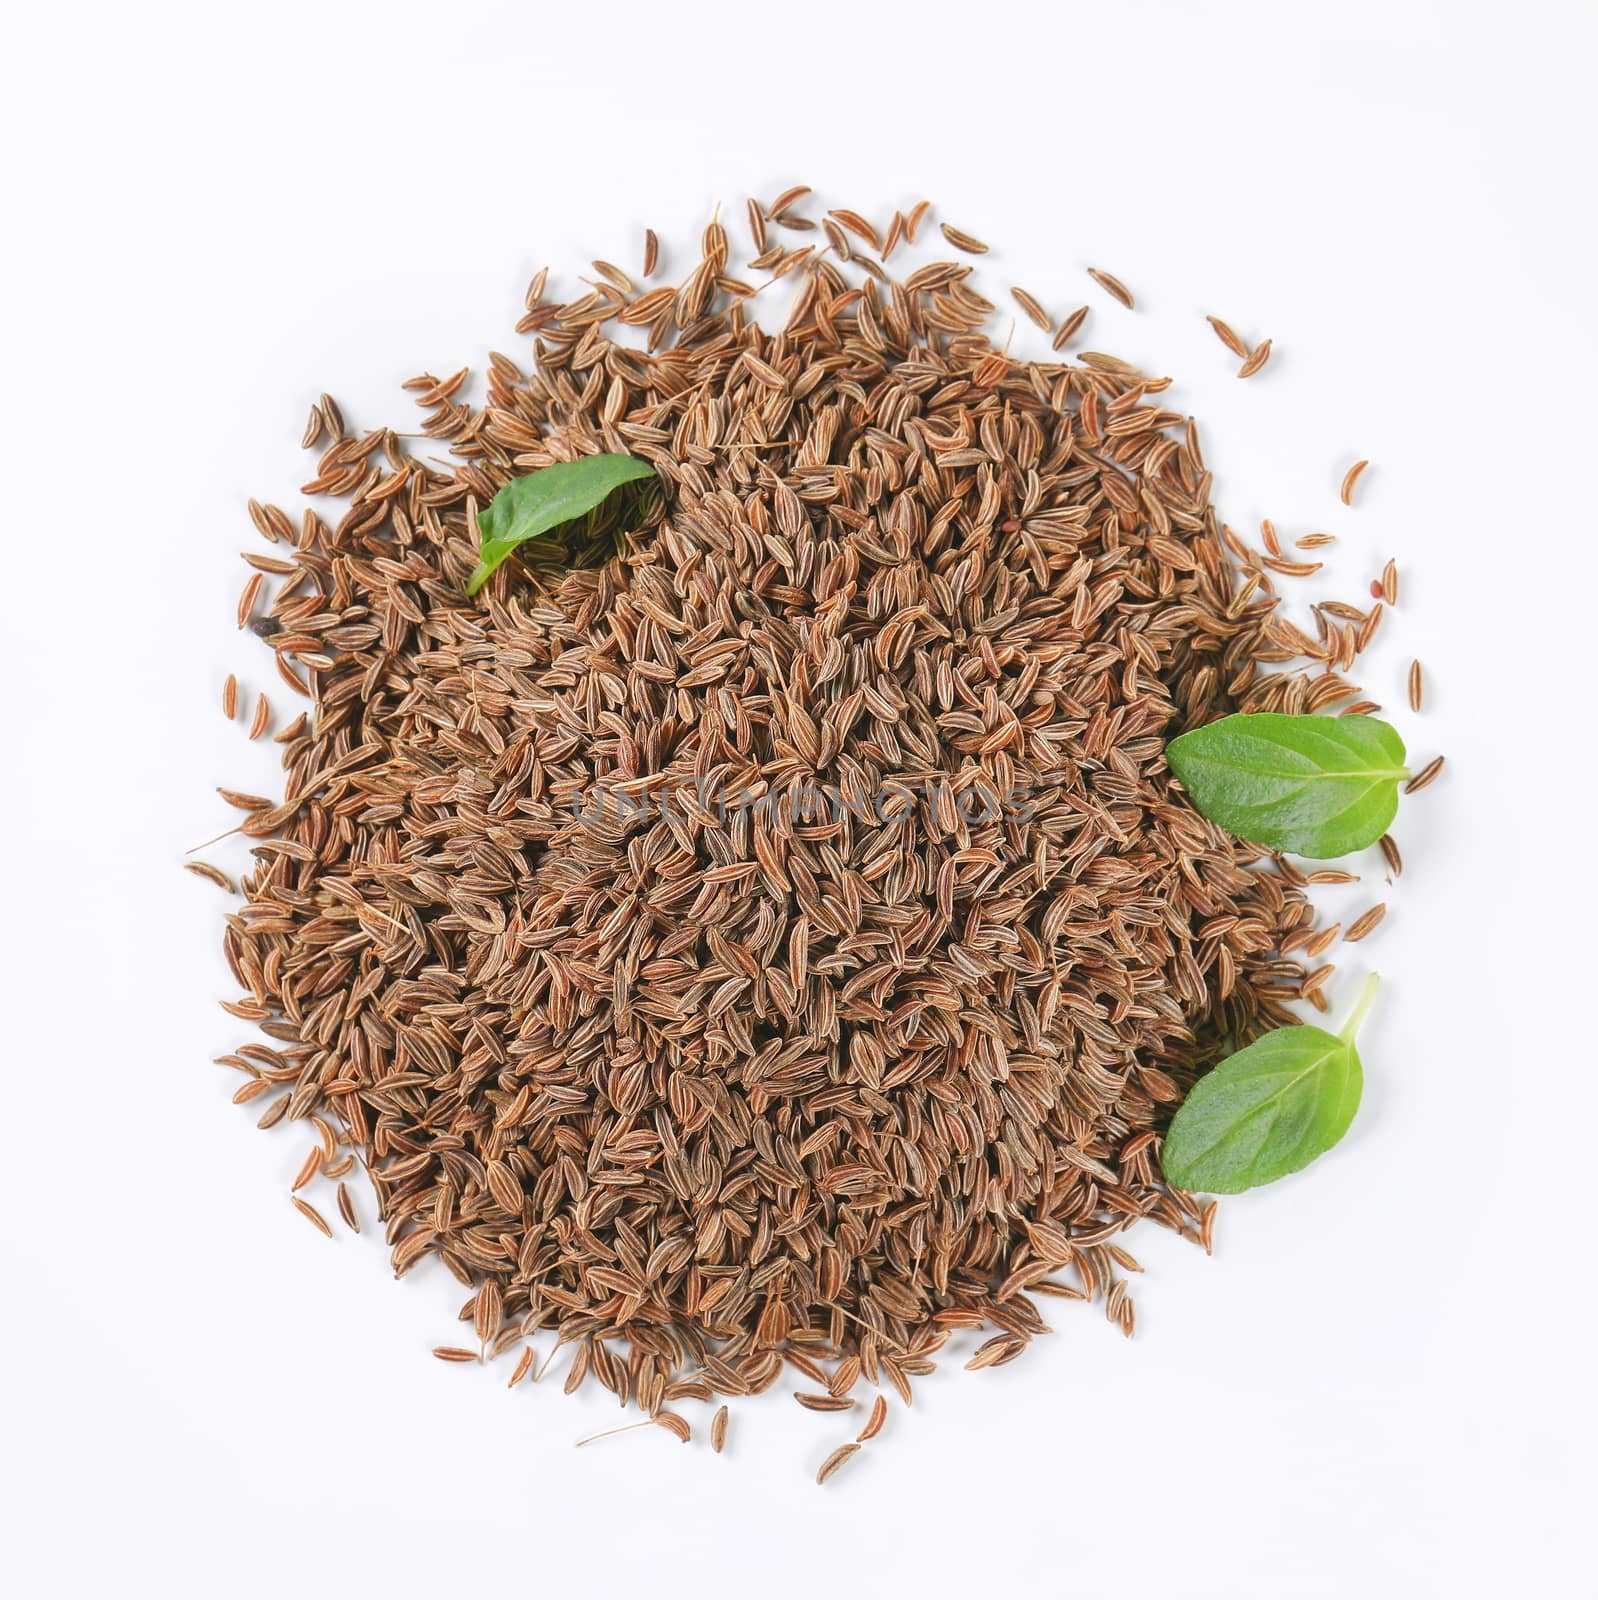 pile of caraway seeds on white background